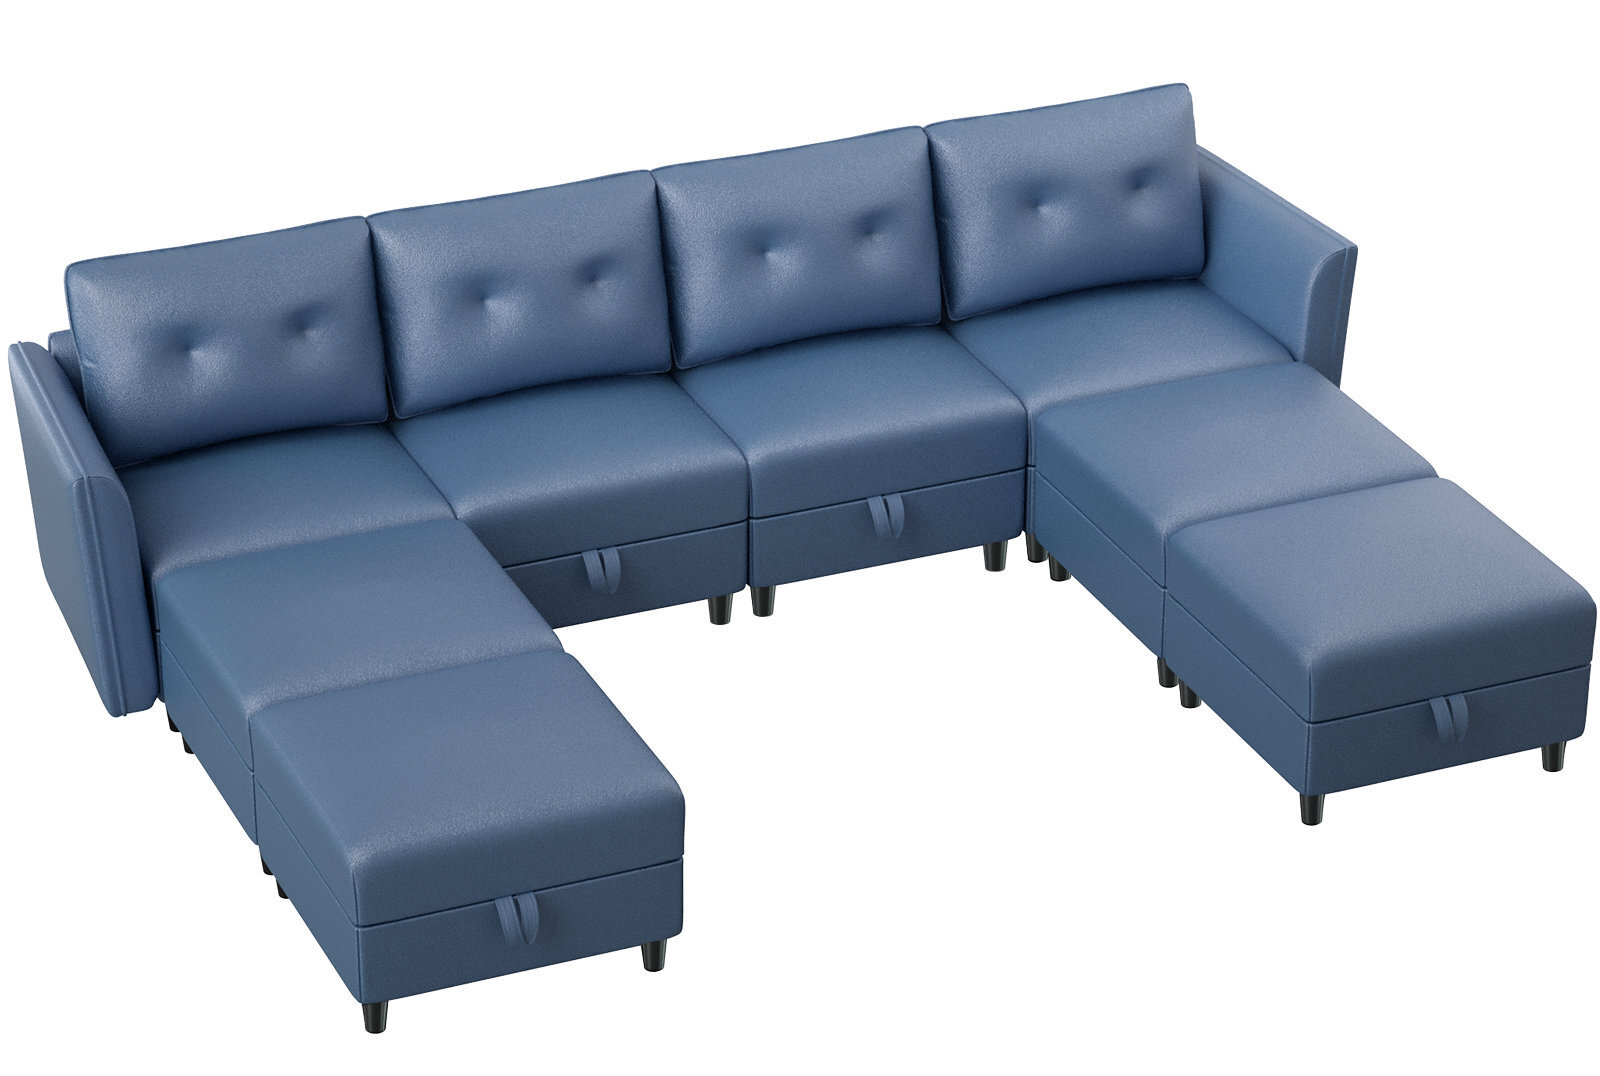 Modular Leather Sectional Sofa With Chaise Lounge